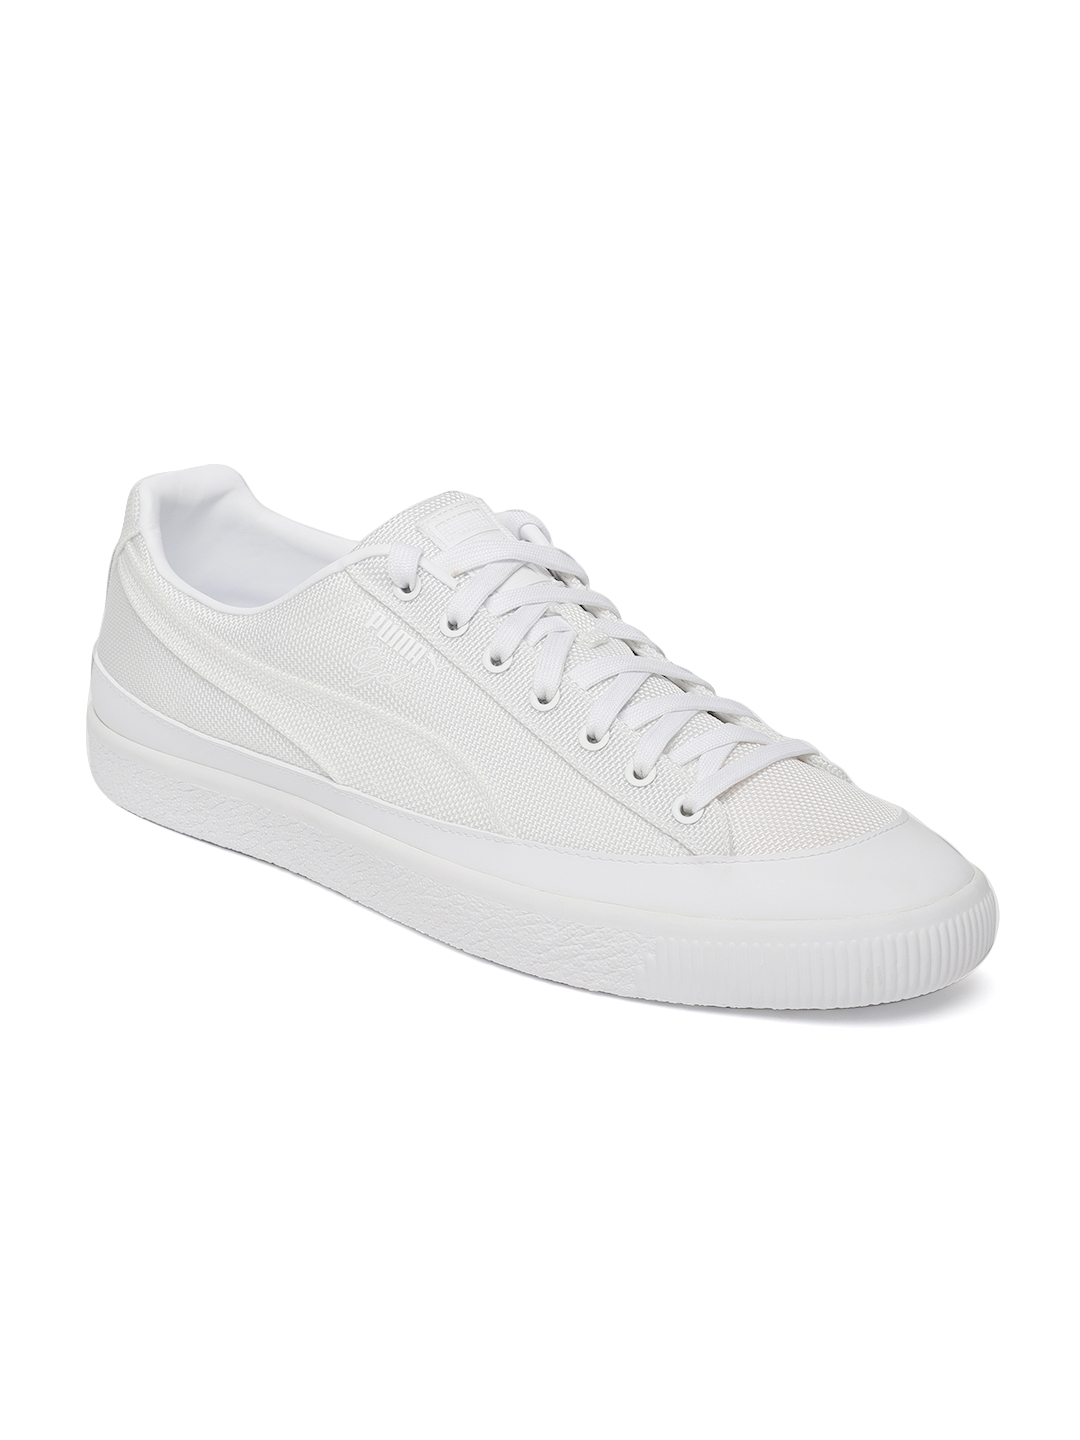 puma clyde rubber toe leather